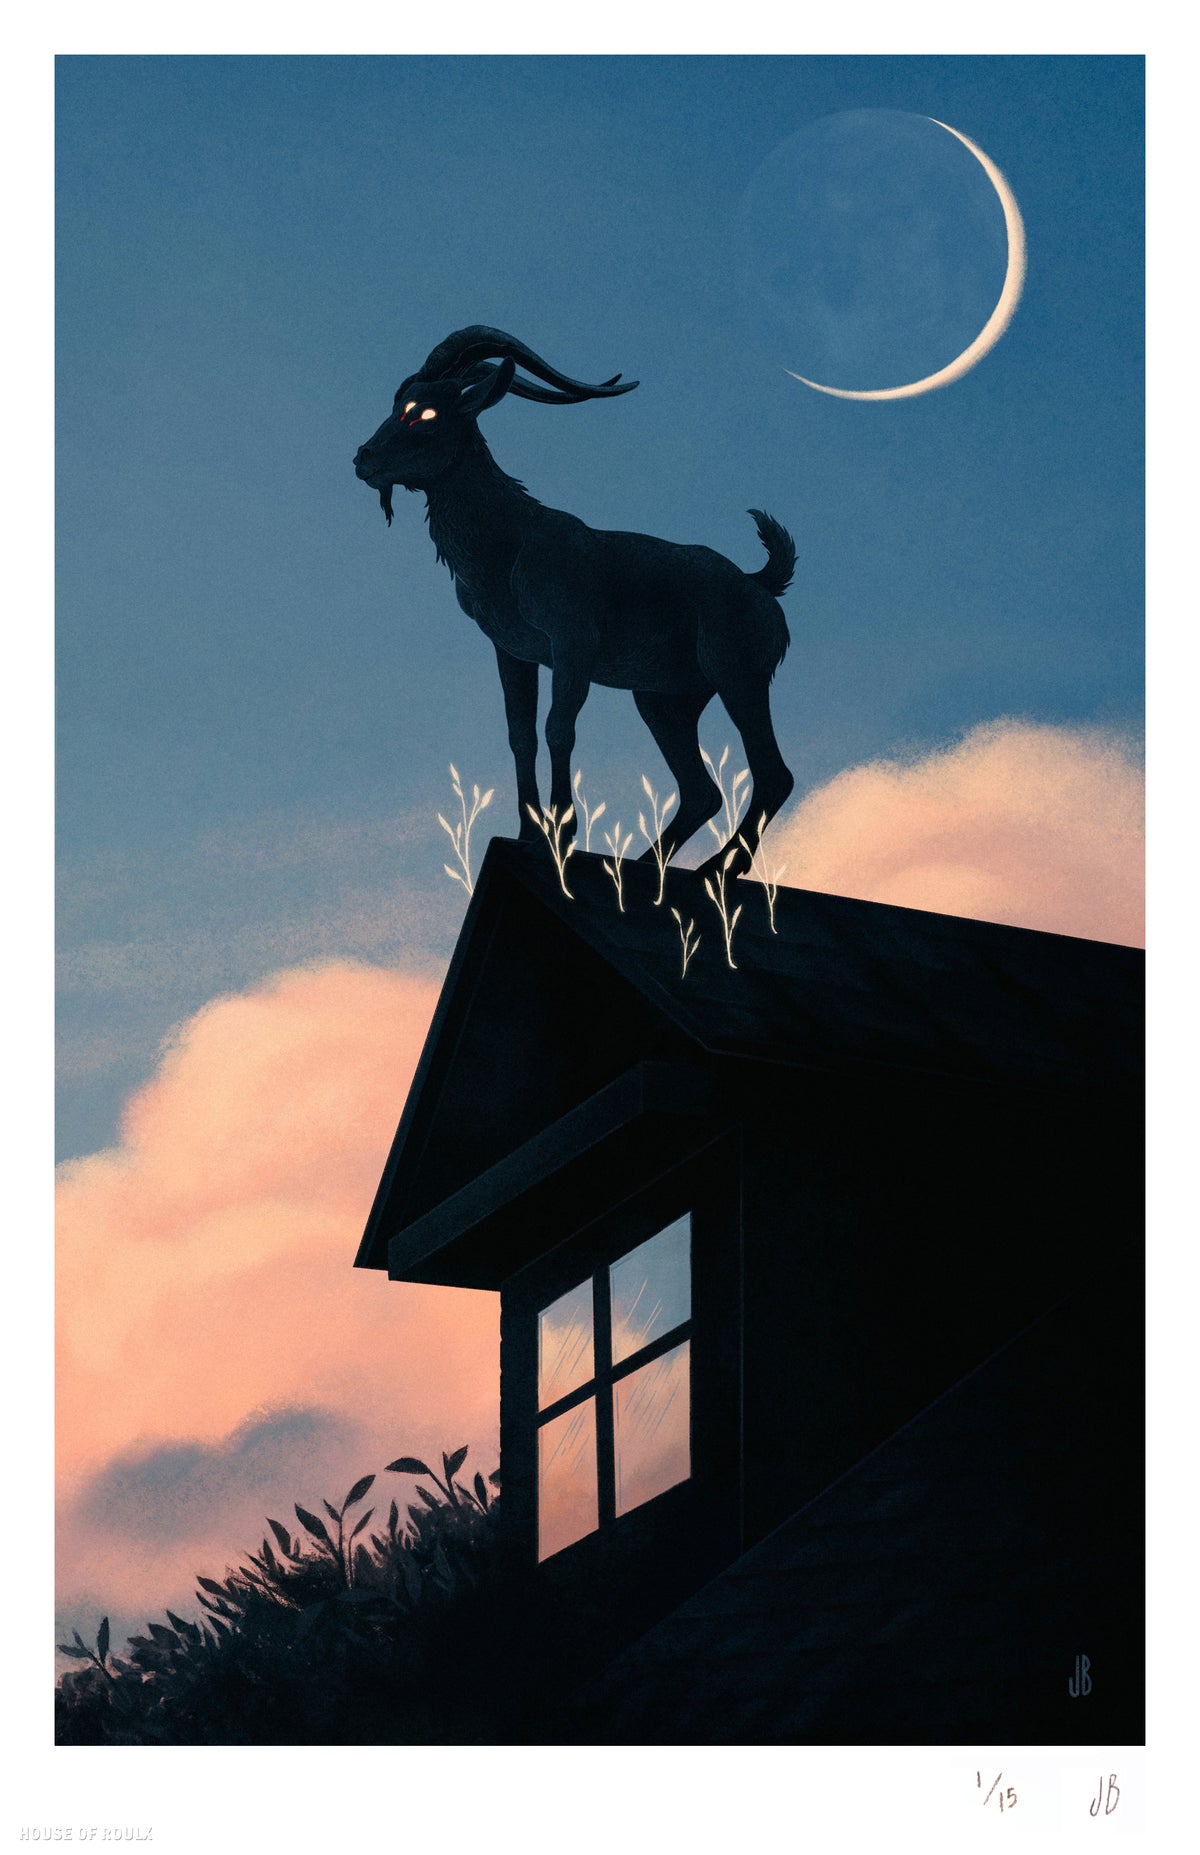 Jenna Barton &quot;Suburban Witchcraft&quot; by - Archival Print, Limited Edition of 15 - 11 x 17&quot;